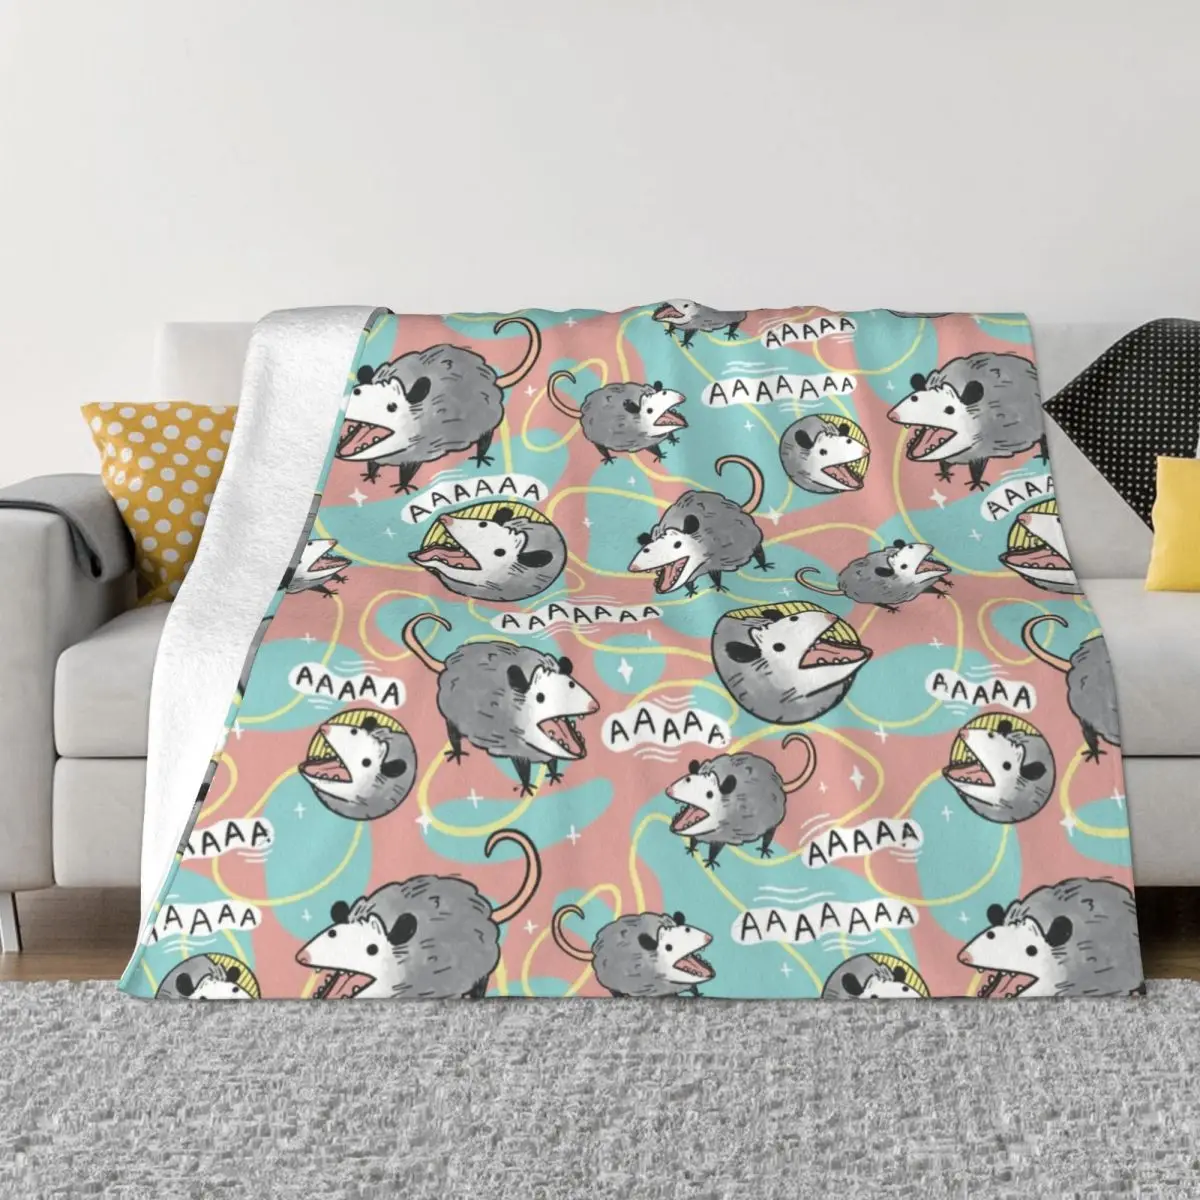 

Opossum Cartoon Plaid Blankets Sofa Cover Flannel Textile Decor Animal Collage Gifts Throw Blanket for Bed Couch Bedding Throws